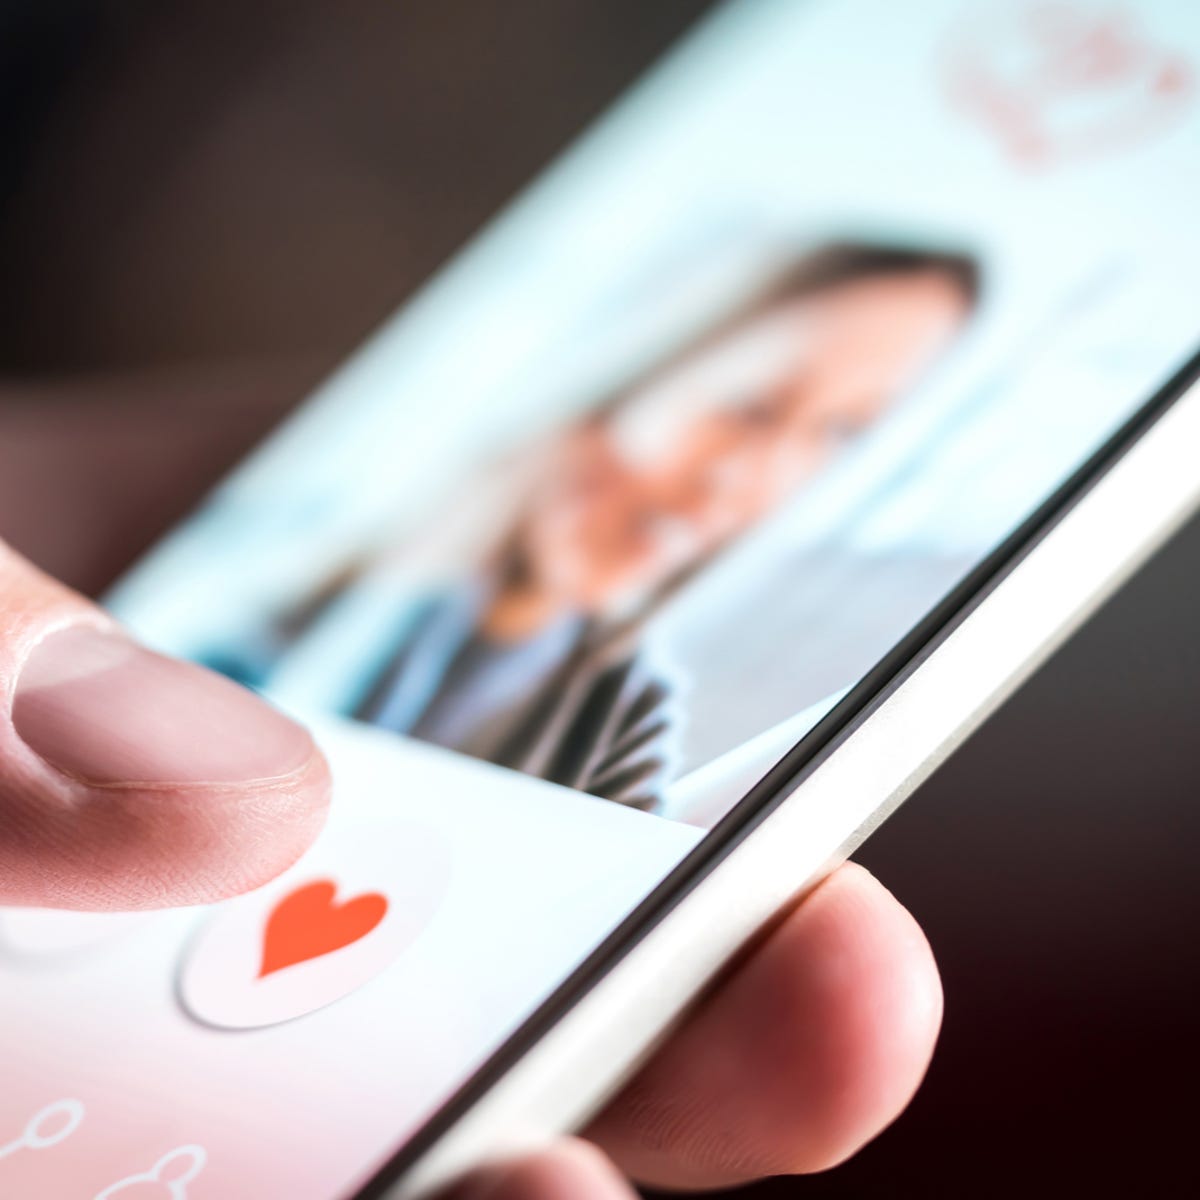 How To Develop A Dating App Like Tinder?